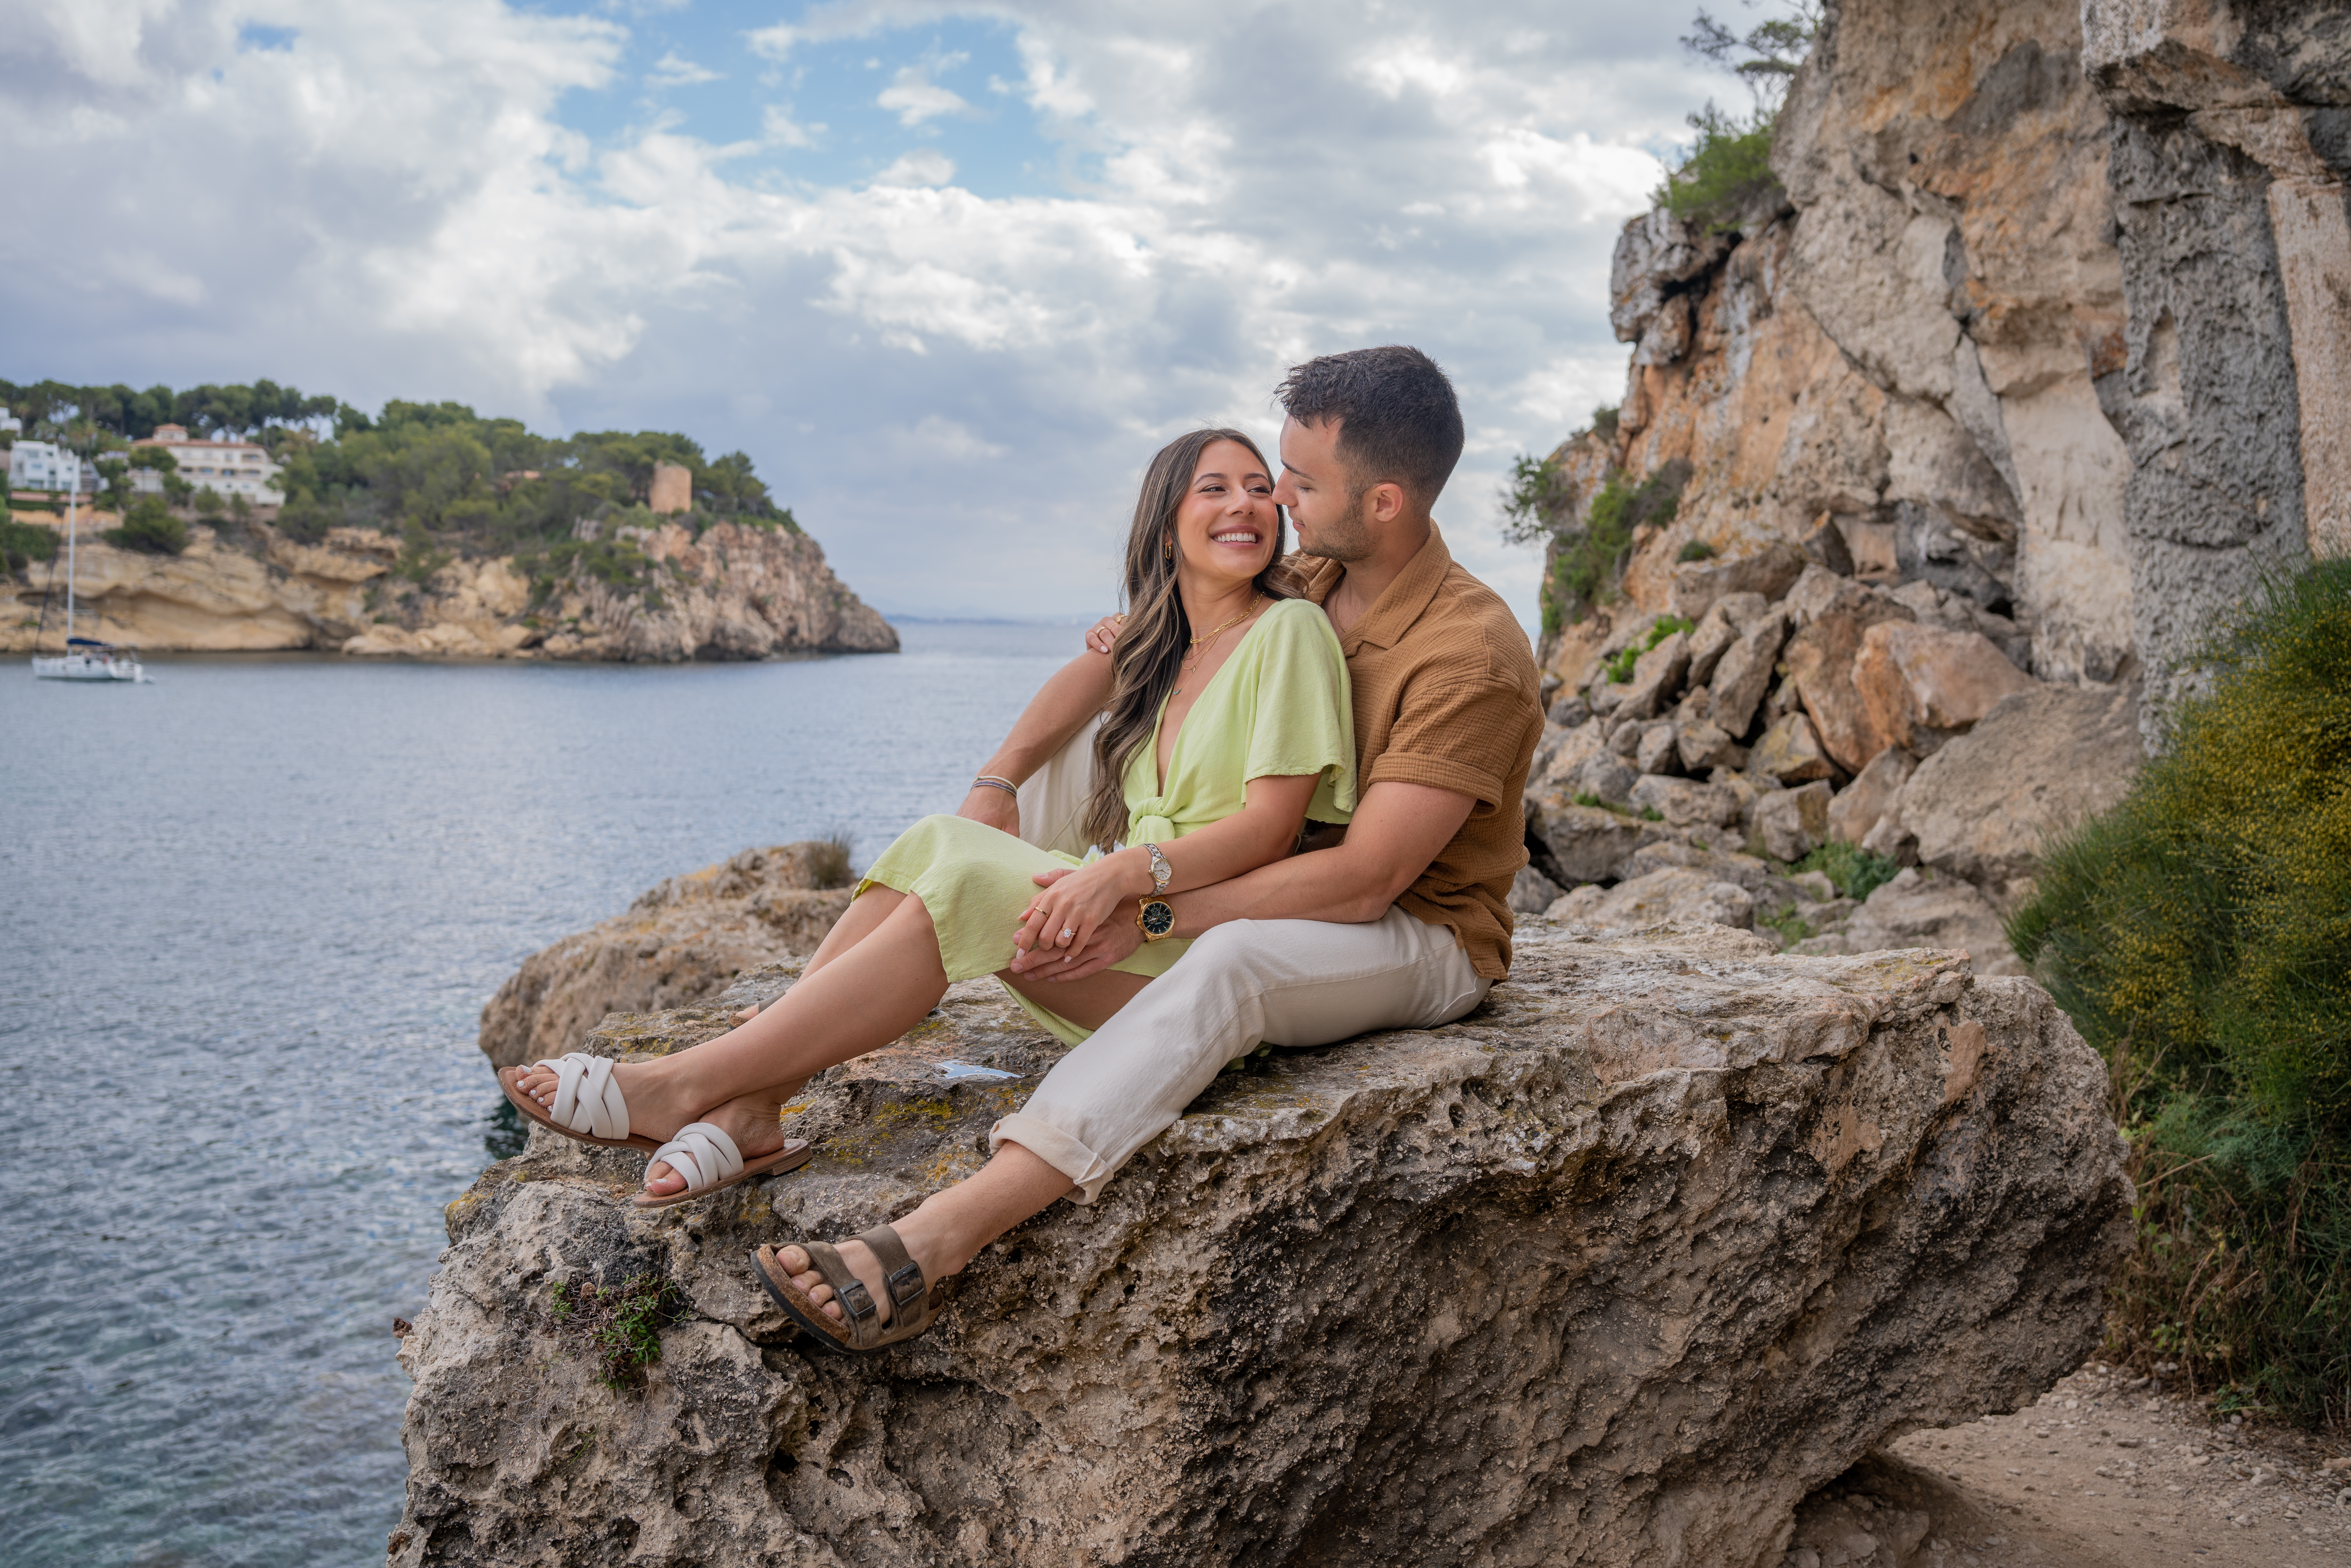 Proposal photoshoot by Jamie, Localgrapher in Mallorca